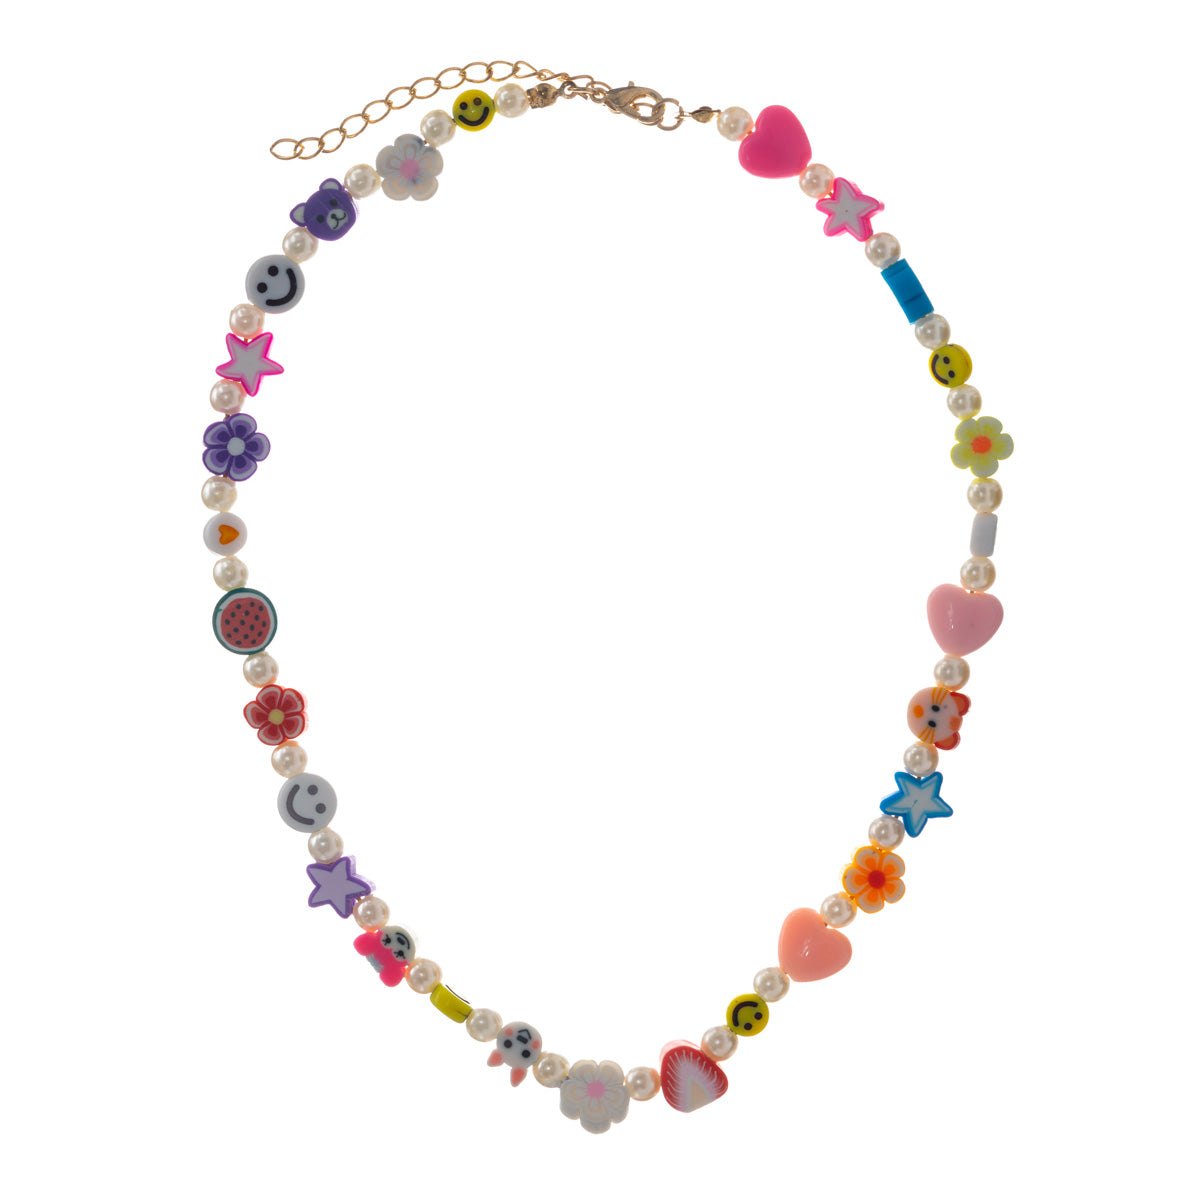 Colored beads necklace 42cm